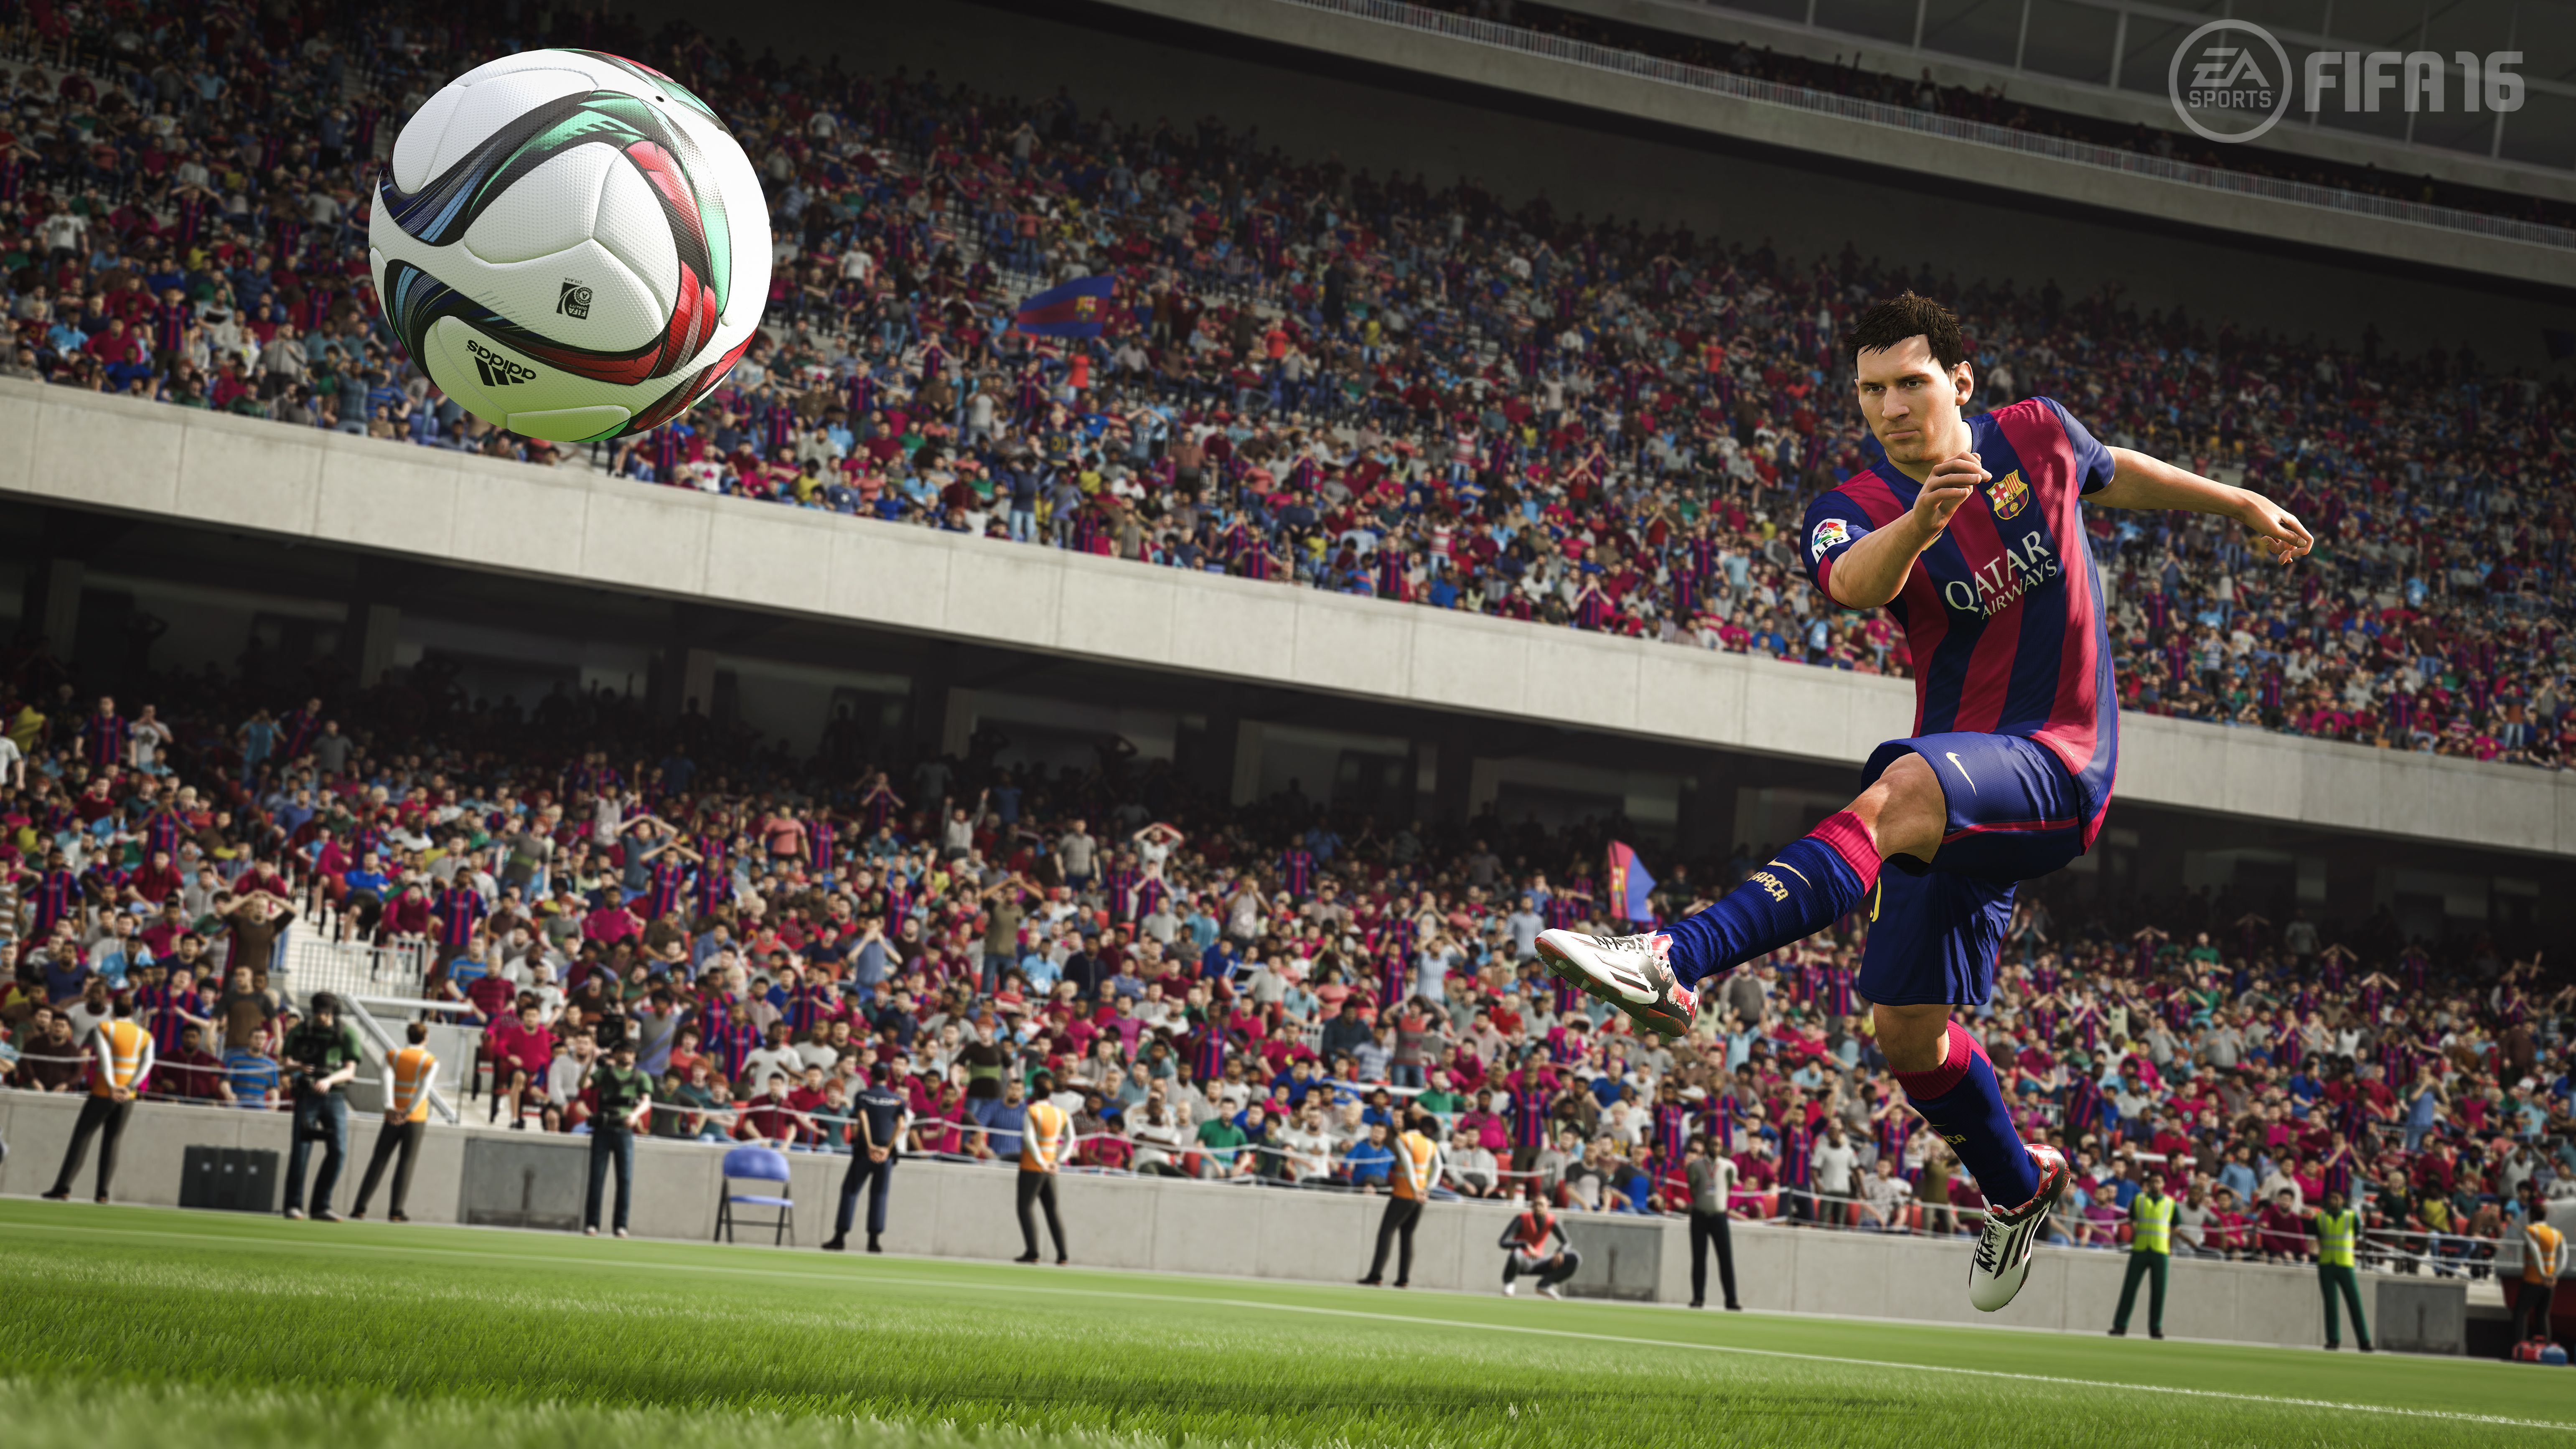 General 6165x3468 Lionel Messi FIFA 16 EA Games EA Sports soccer soccer ball video games PC gaming sport